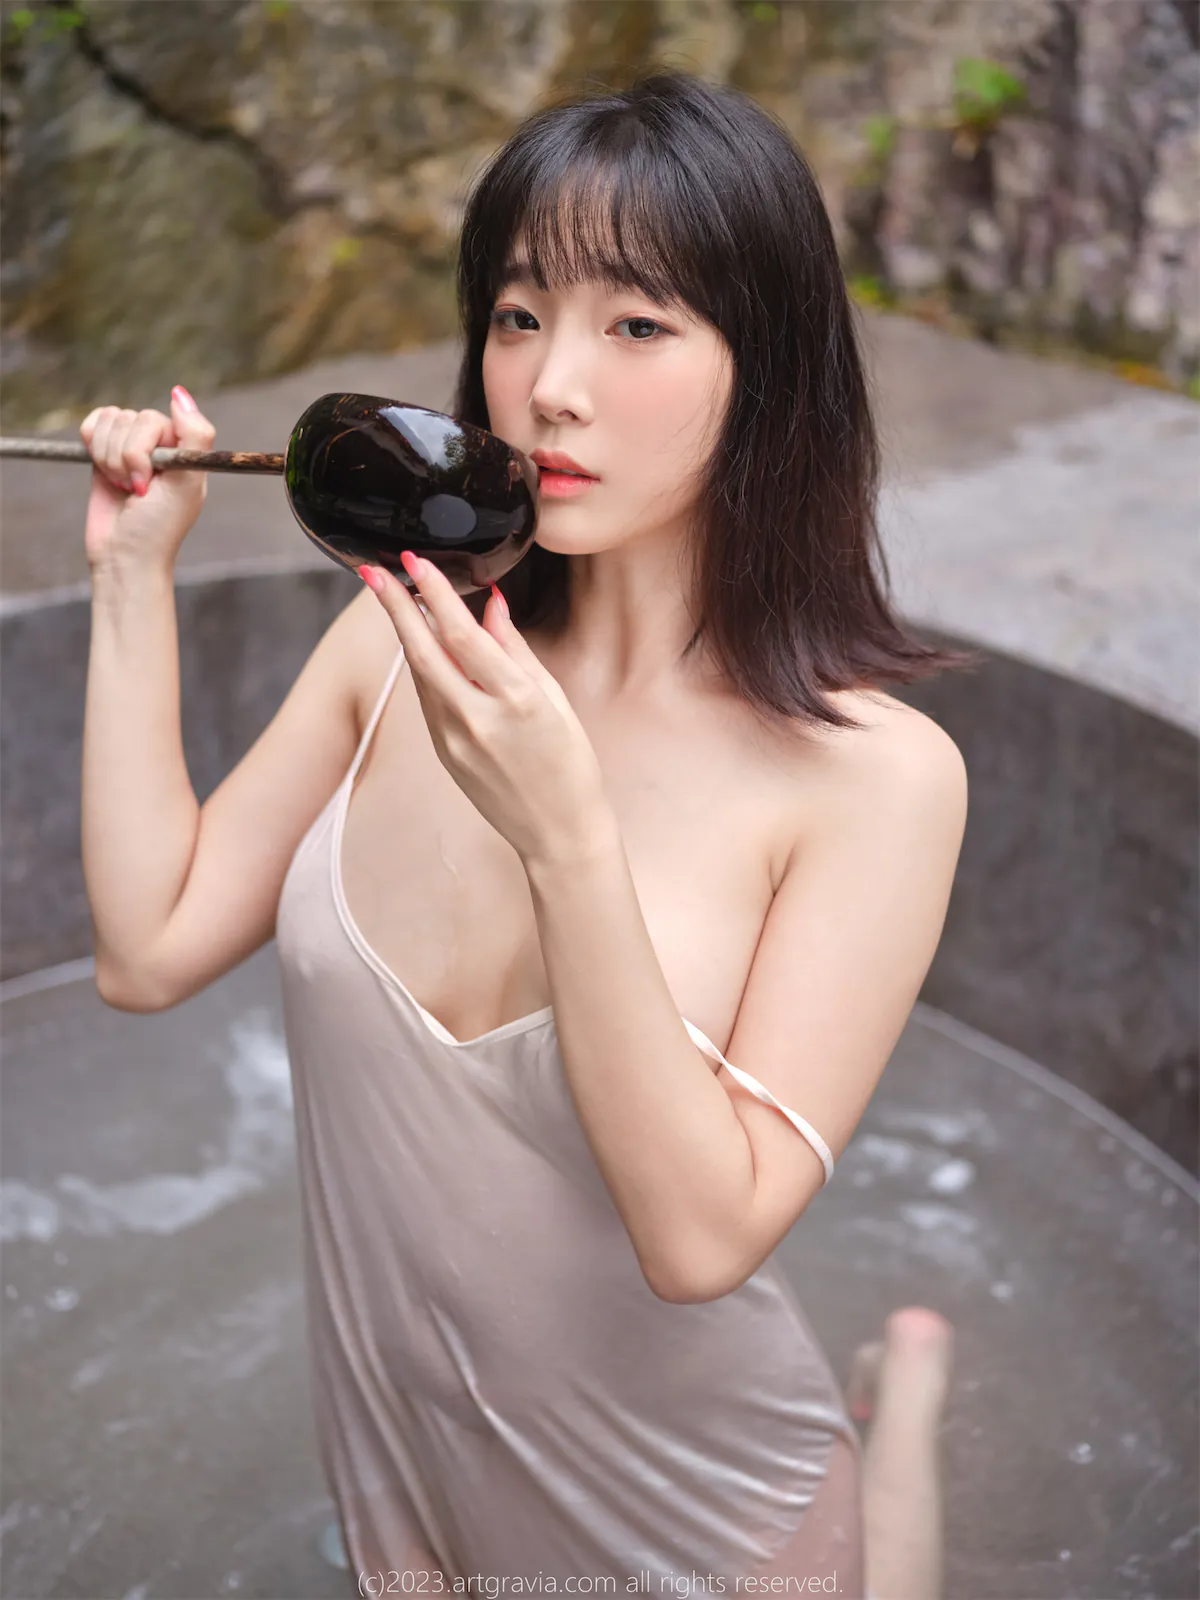 AG.492-Kang-In-kyung-coszip.com-020